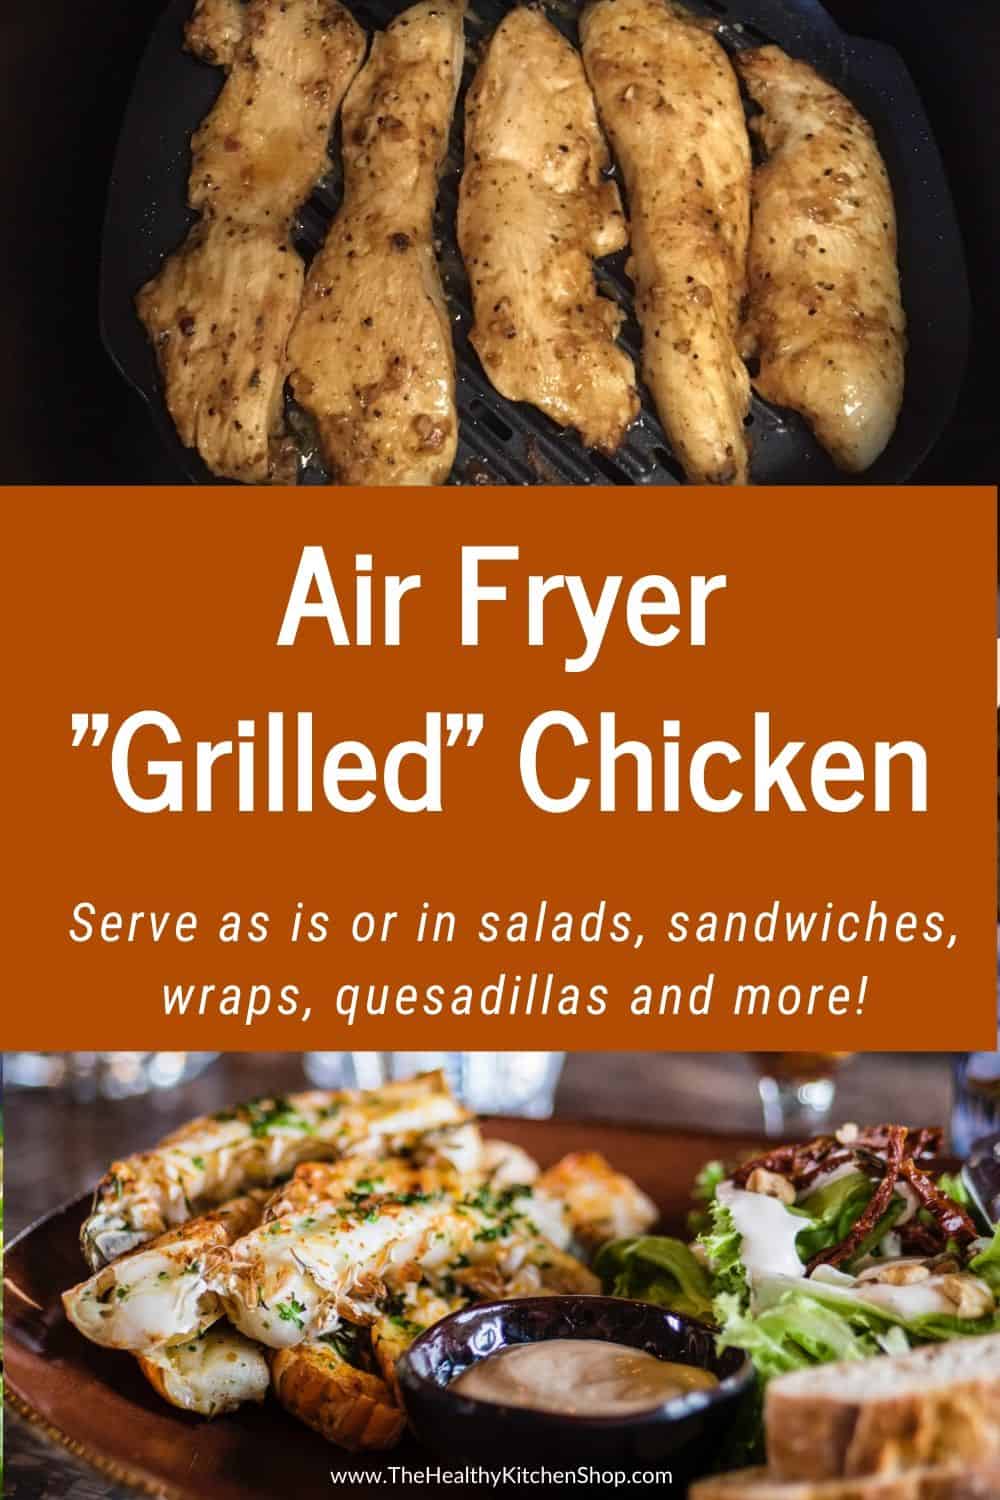 Air Fryer Grilled Chicken - Great in salads, wraps & lots more.